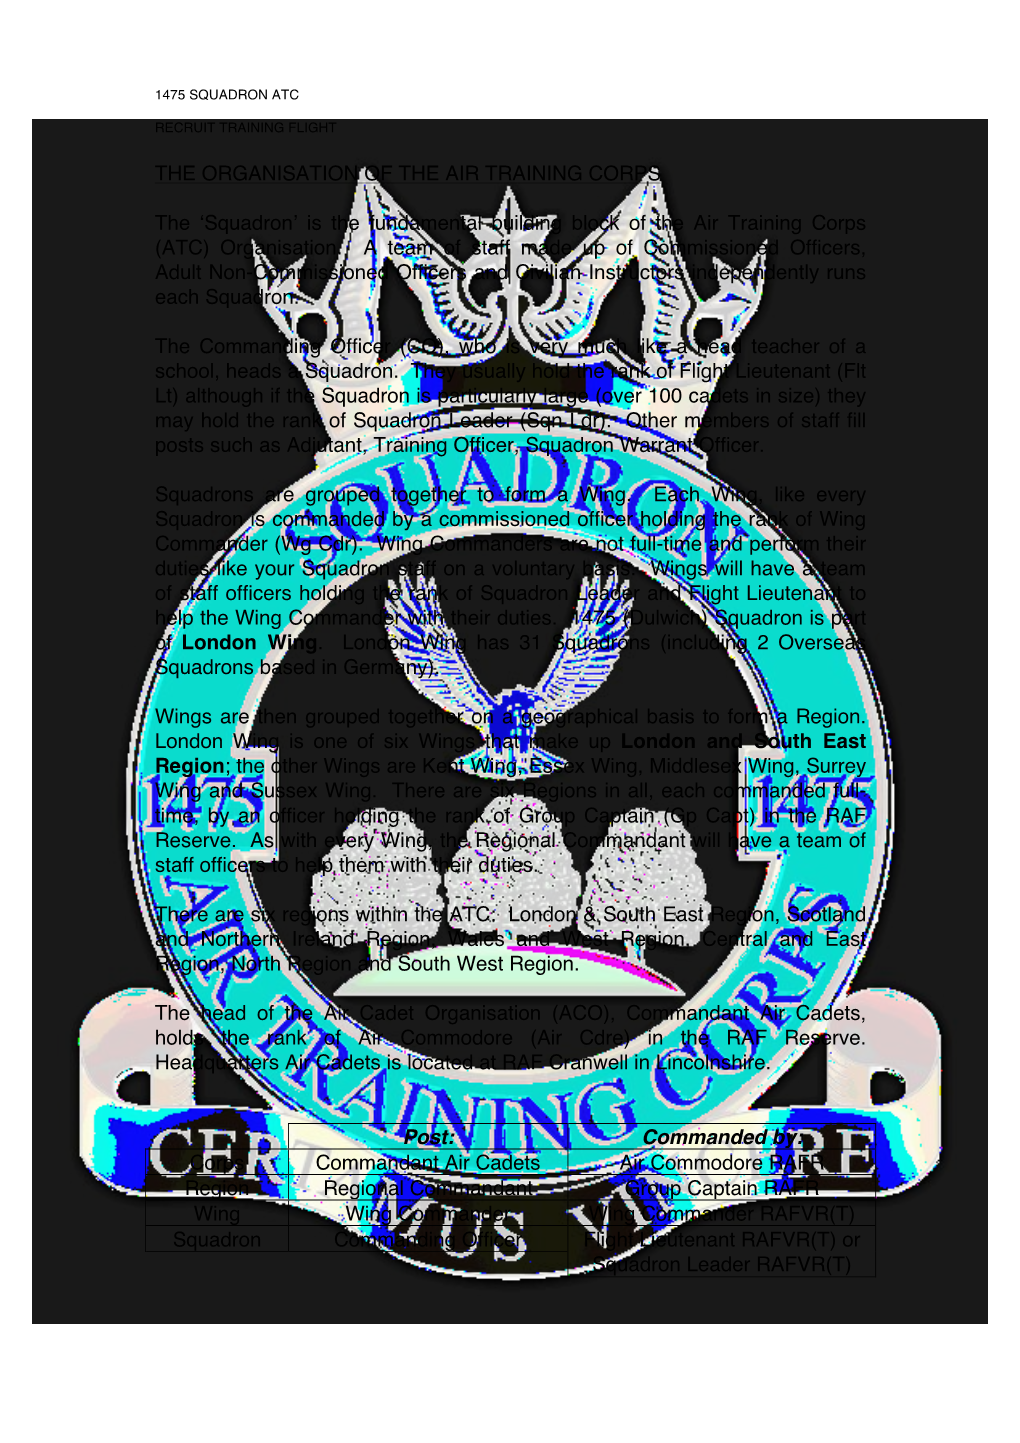 THE ORGANISATION of the AIR TRAINING CORPS the 'Squadron